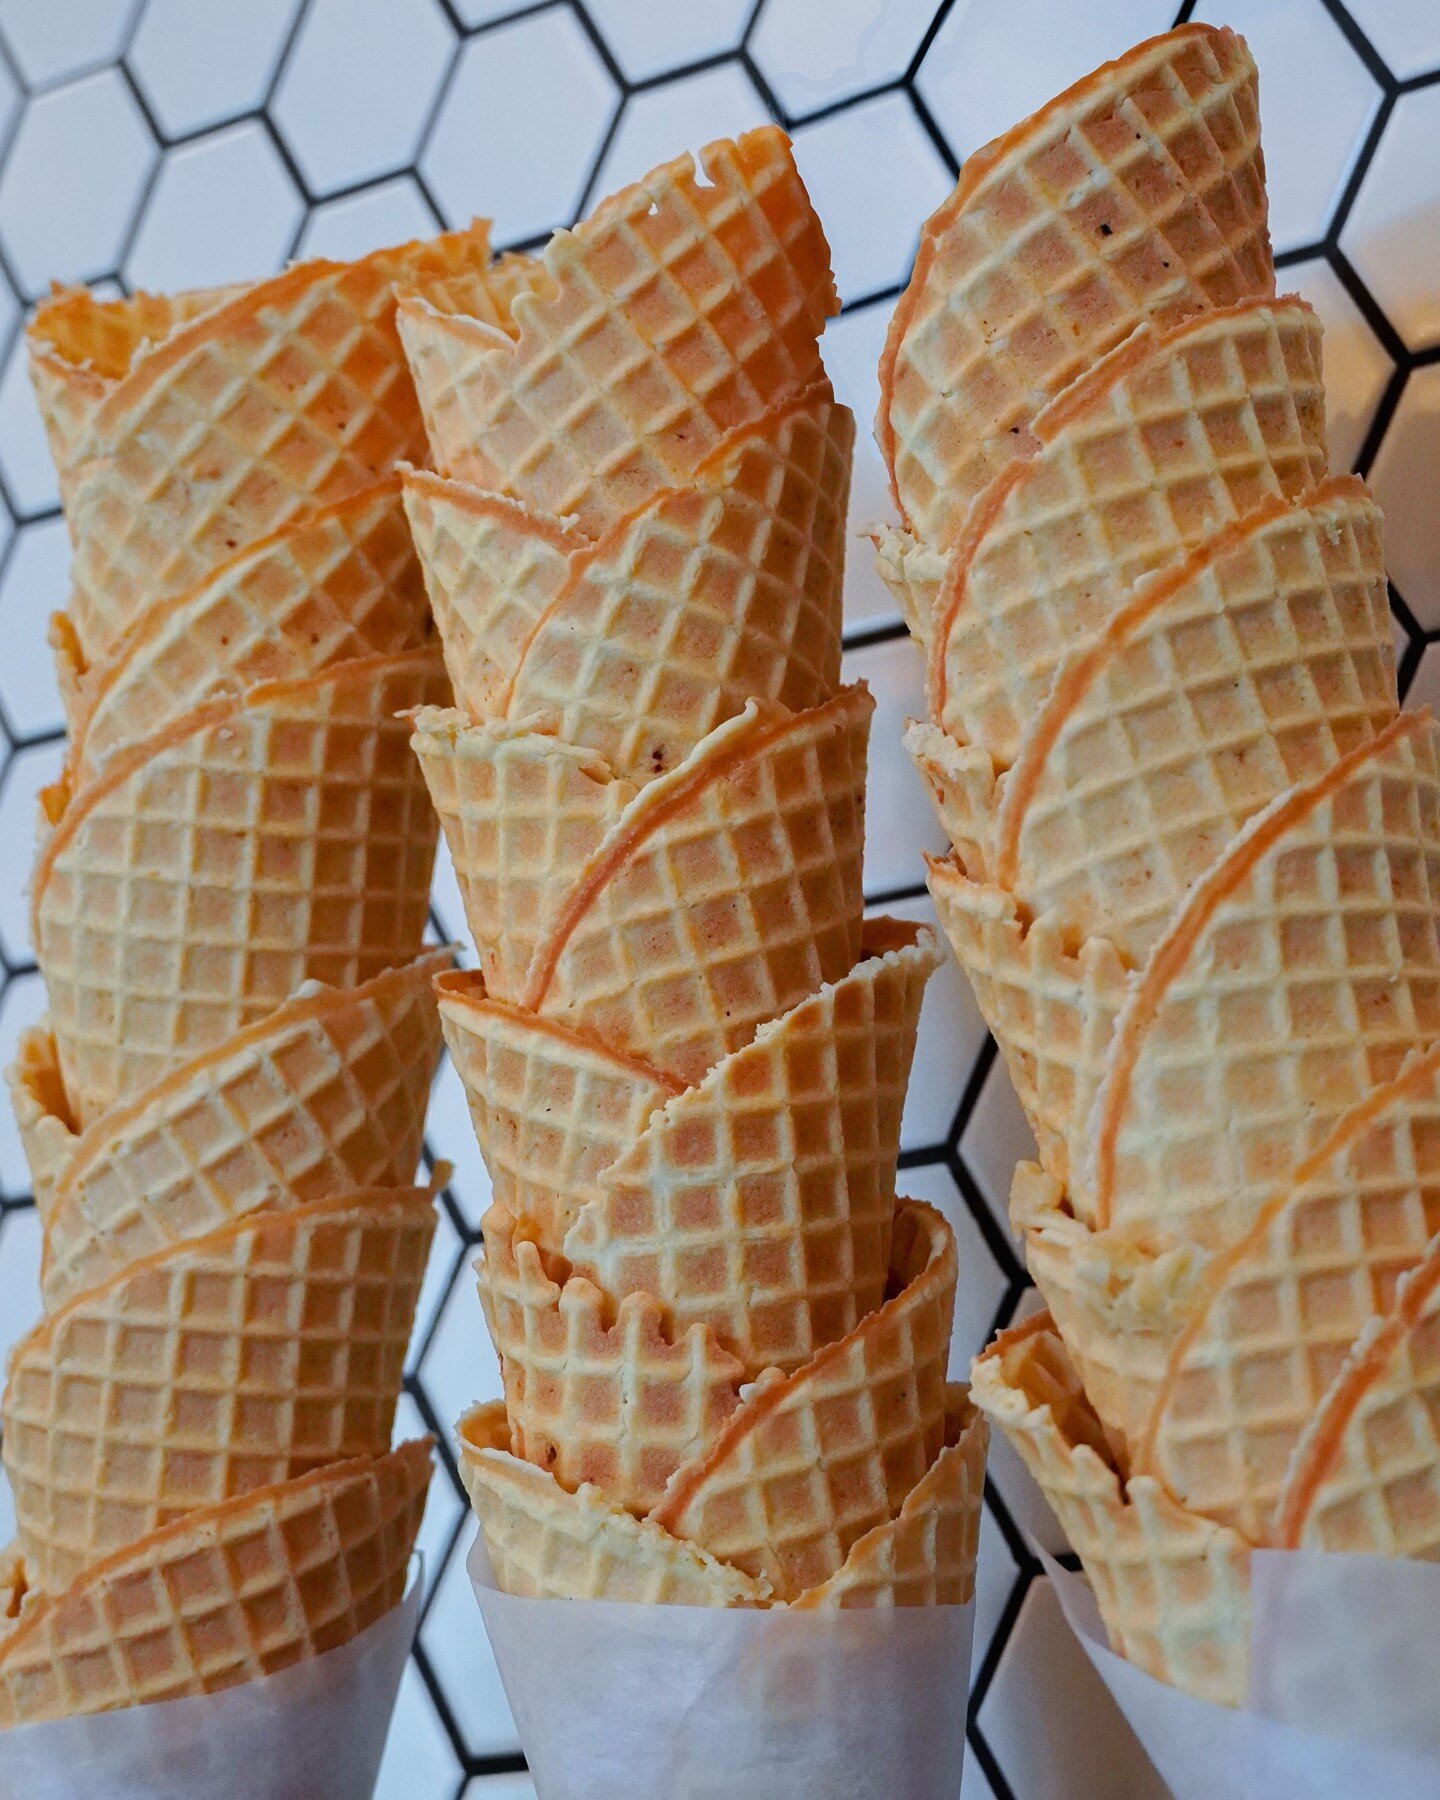 Did you know we make our waffle cones from scratch? 🍦 From the buttery batter, to rolling them into the perfect cone shape, everything is made fresh in house! There's nothing better than a flaky, warm waffle cone (even at the end of your visit when 